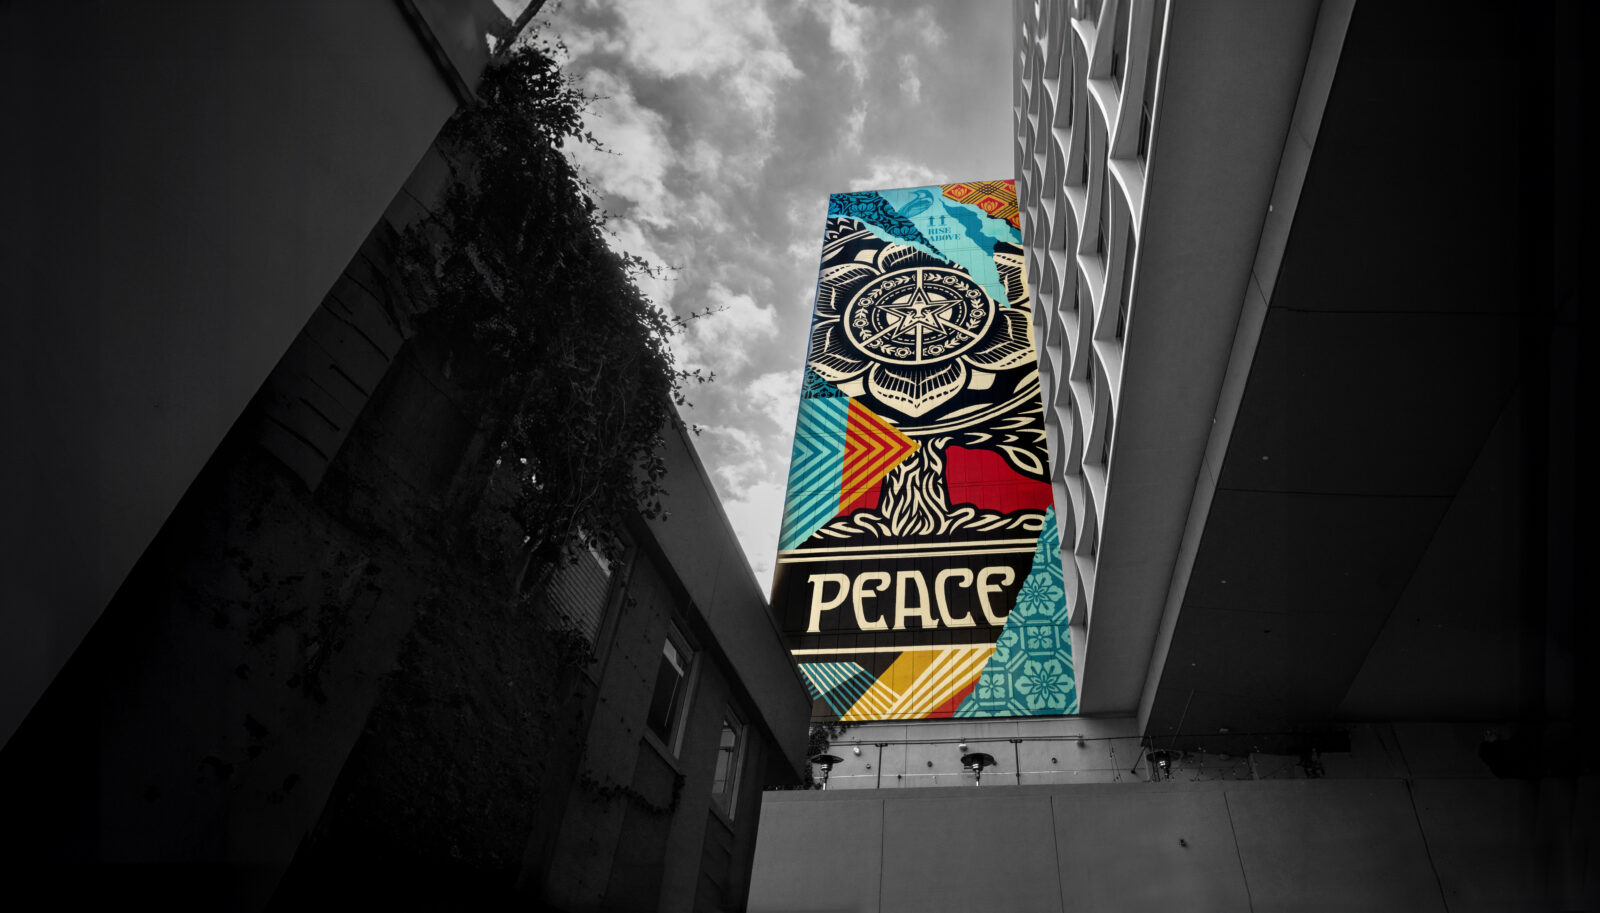 Image of mural by Shepard Fairey